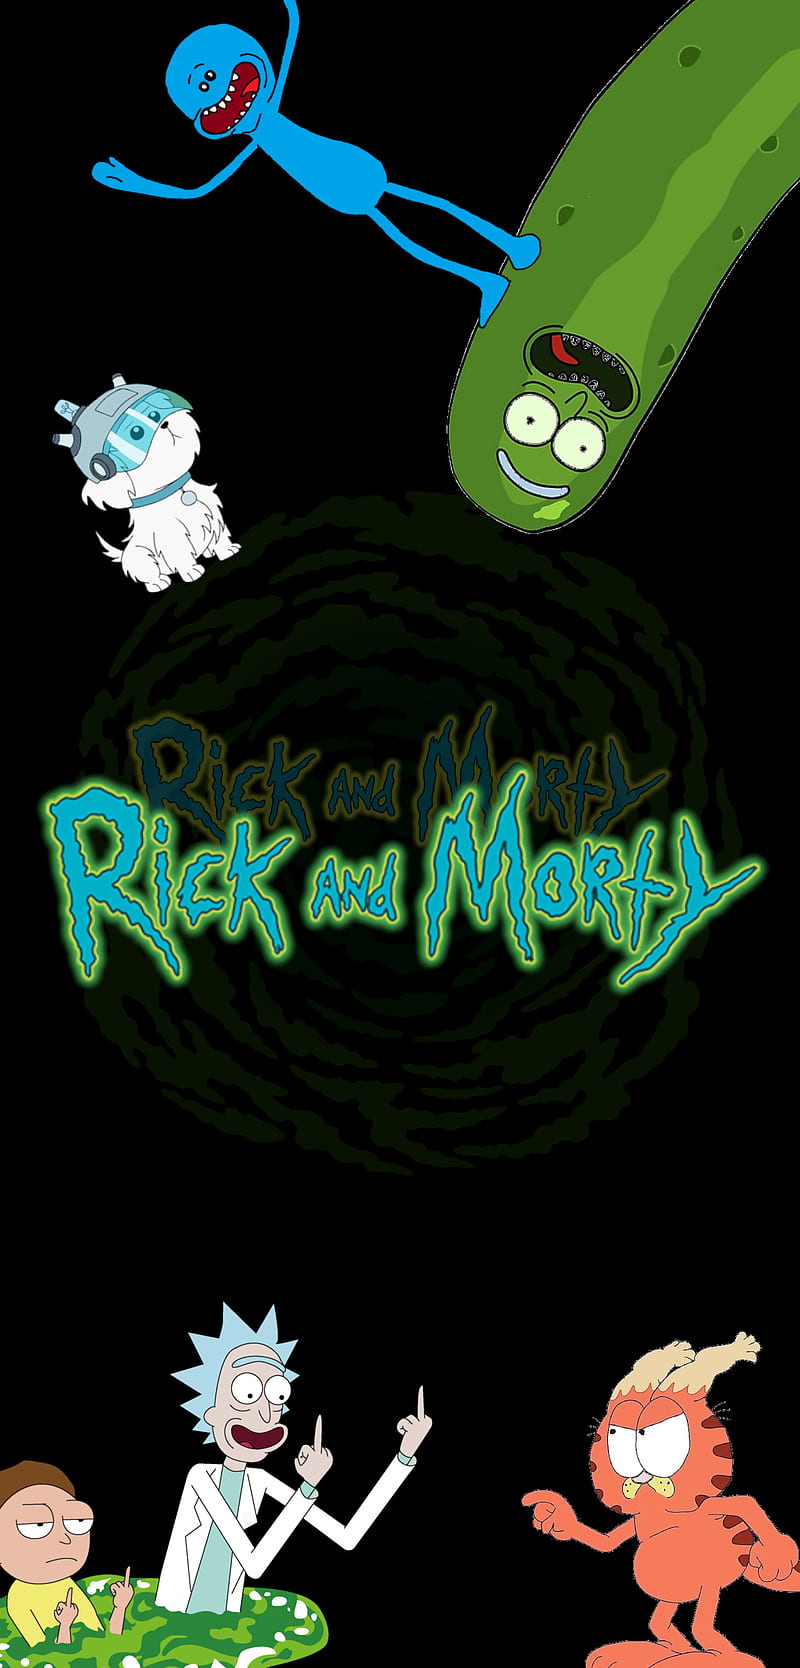 Download do APK de Rick And Morty Cool Teen Dope Live Wallpaper para Android